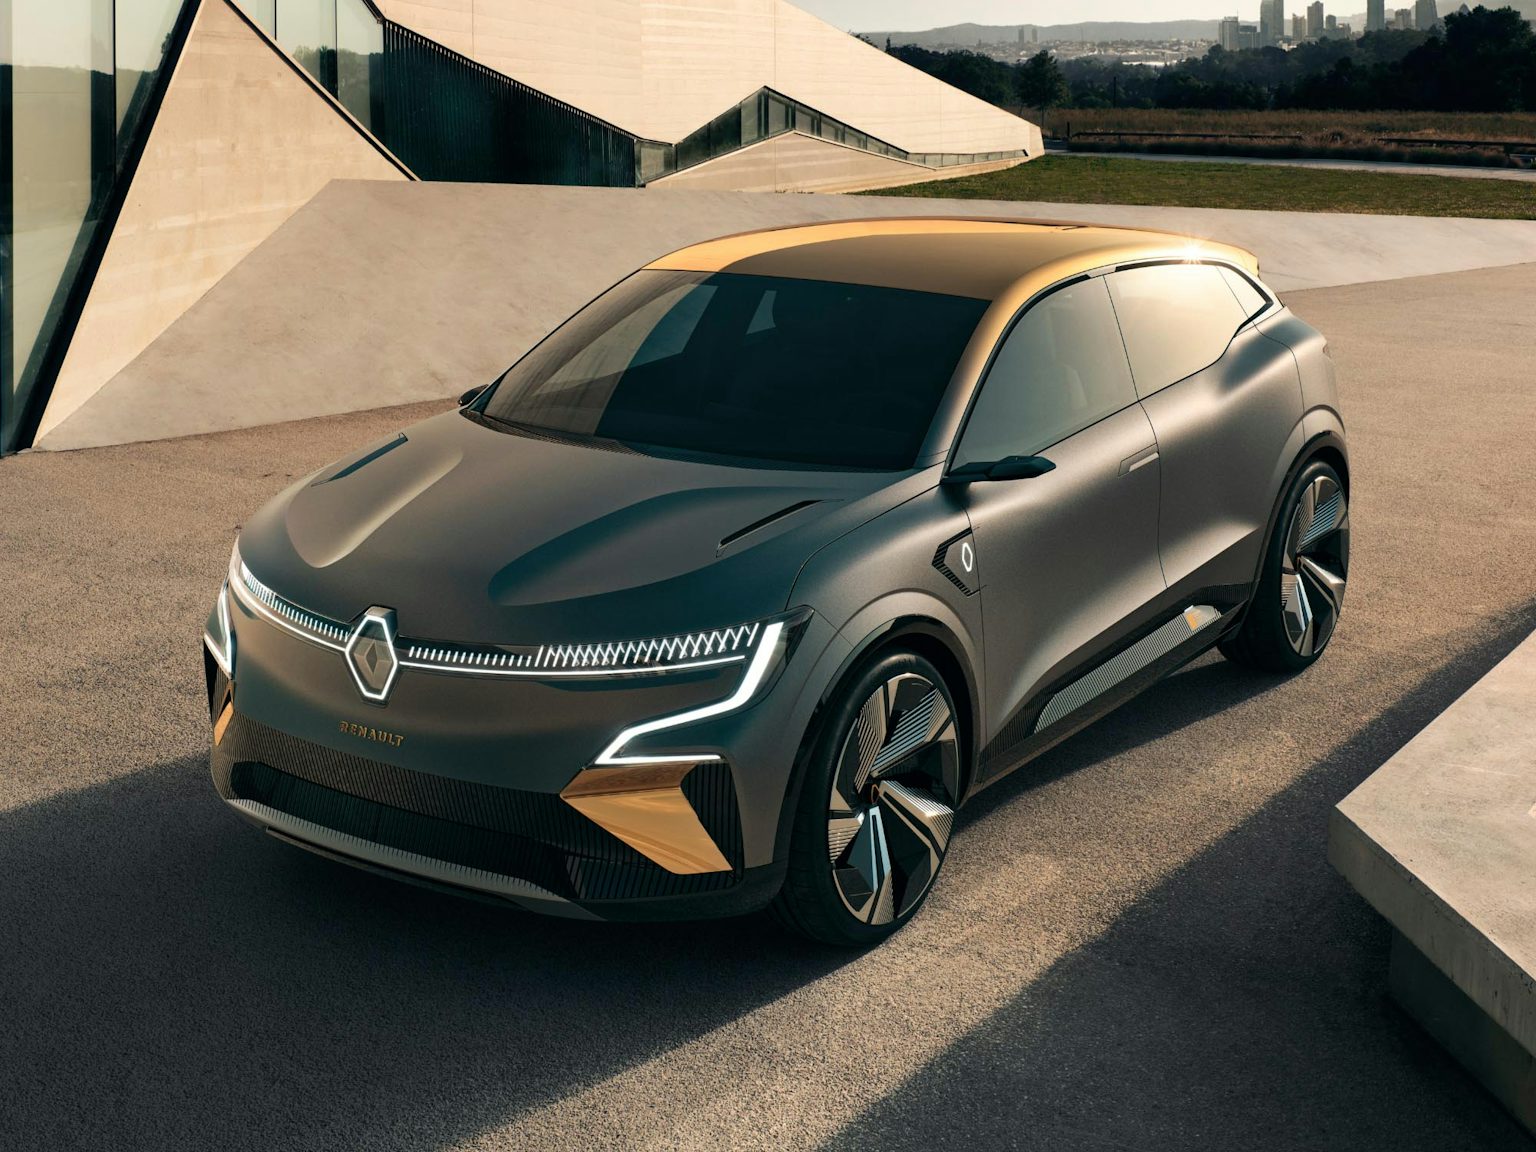 New Renault 5 electric car revealed price, specs and release date carwow